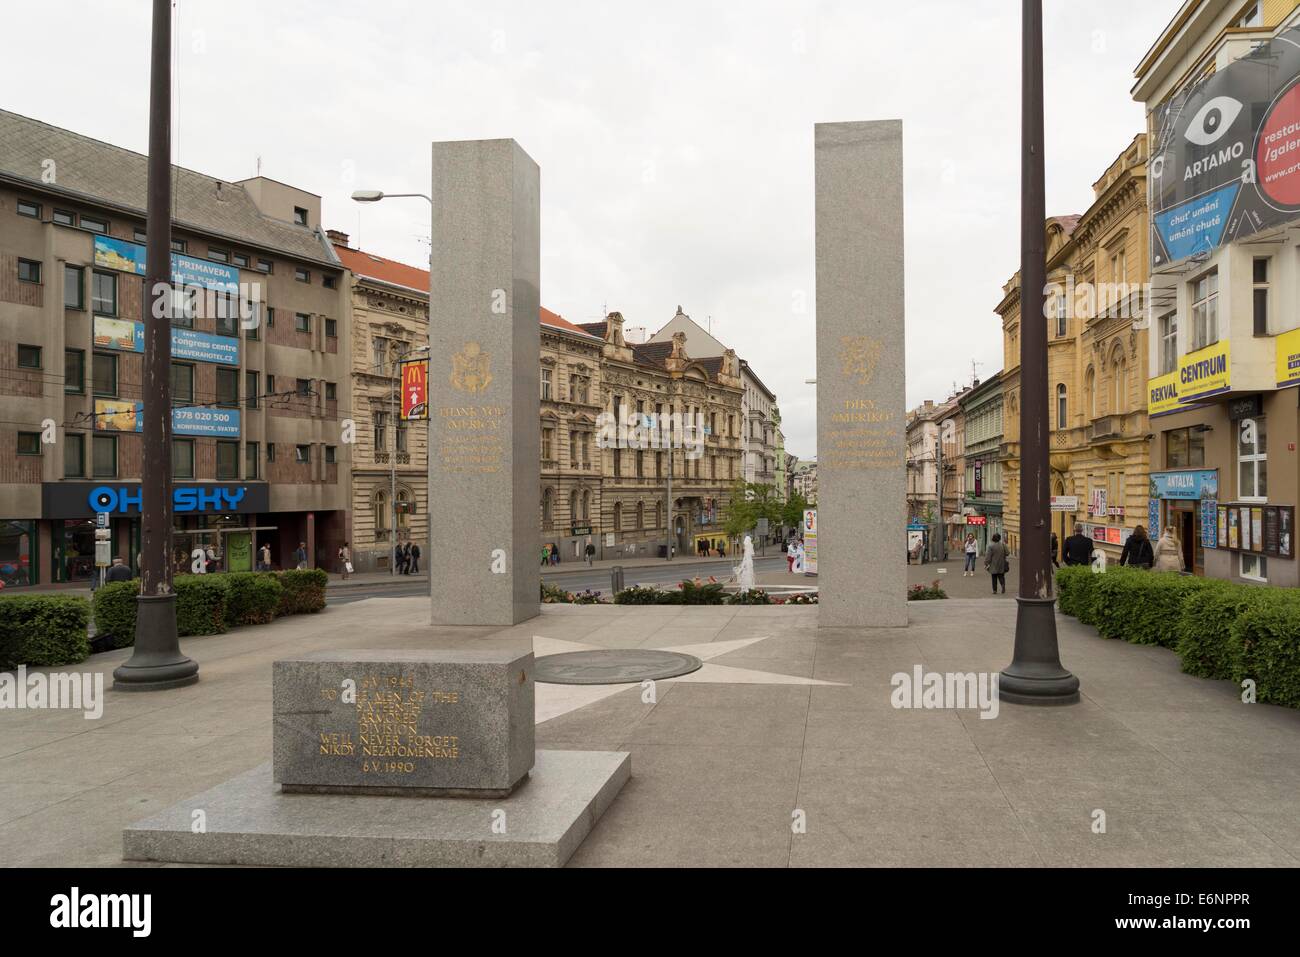 memorial remembering the liberation of Pilsen by US Forces in 1945 Stock Photo